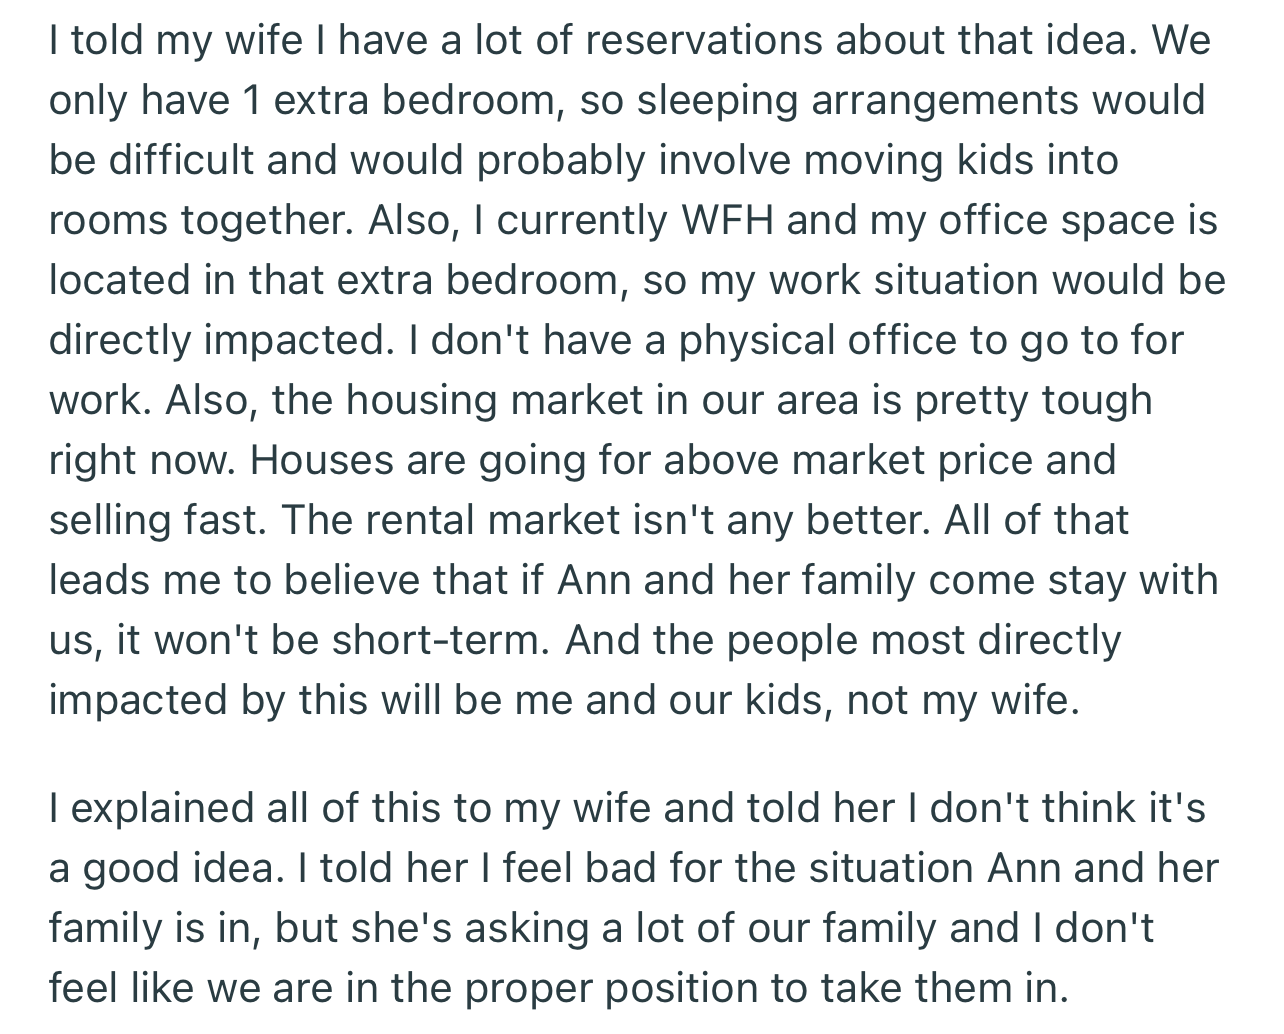 OP made it clear to his wife that he has a lot of reservations about Ann moving in with them